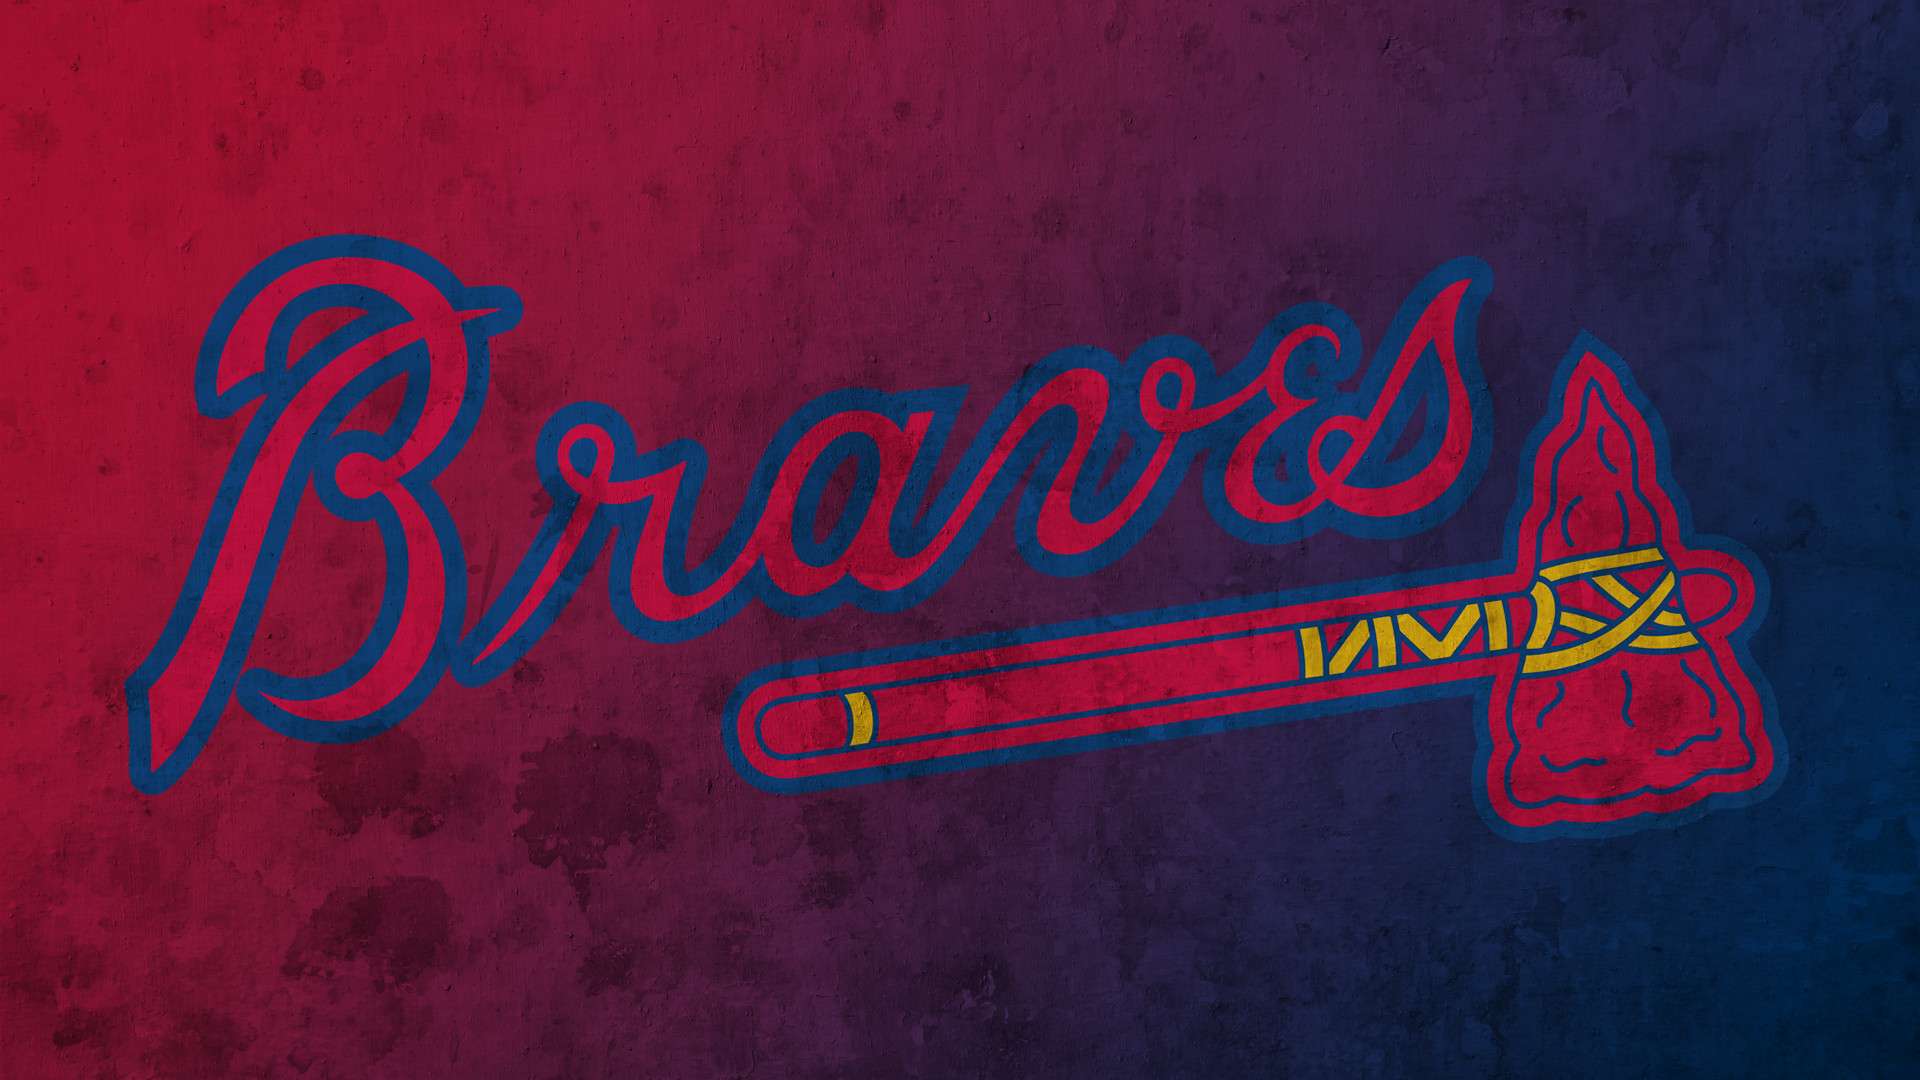 braves iphone wallpaper,font,text,red,graphic design,maroon